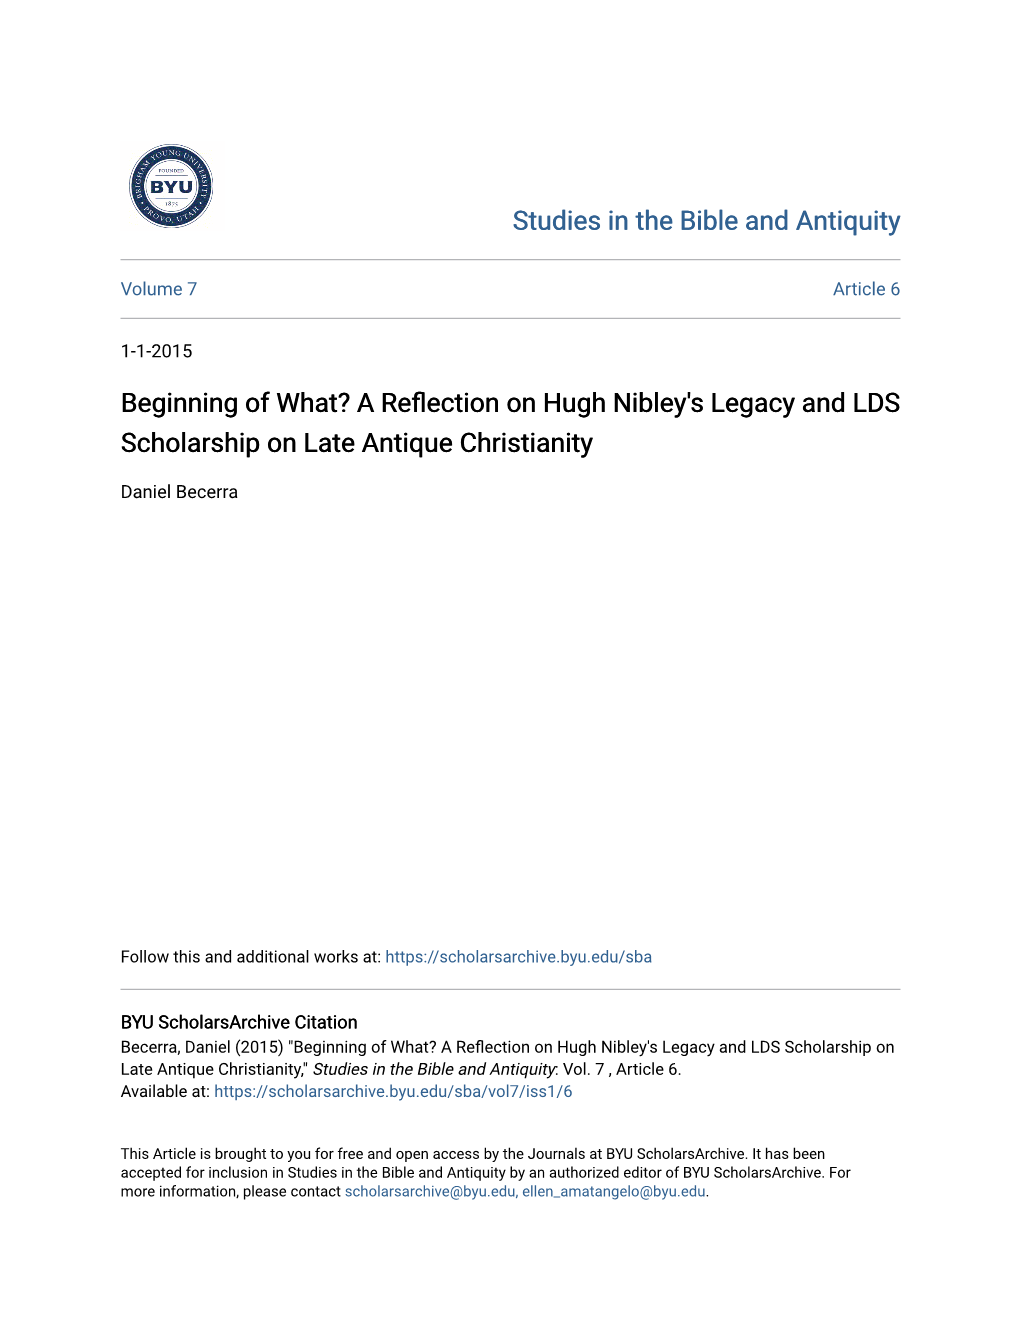 A Reflection on Hugh Nibley's Legacy and LDS Scholarship on Late Antique Christianity